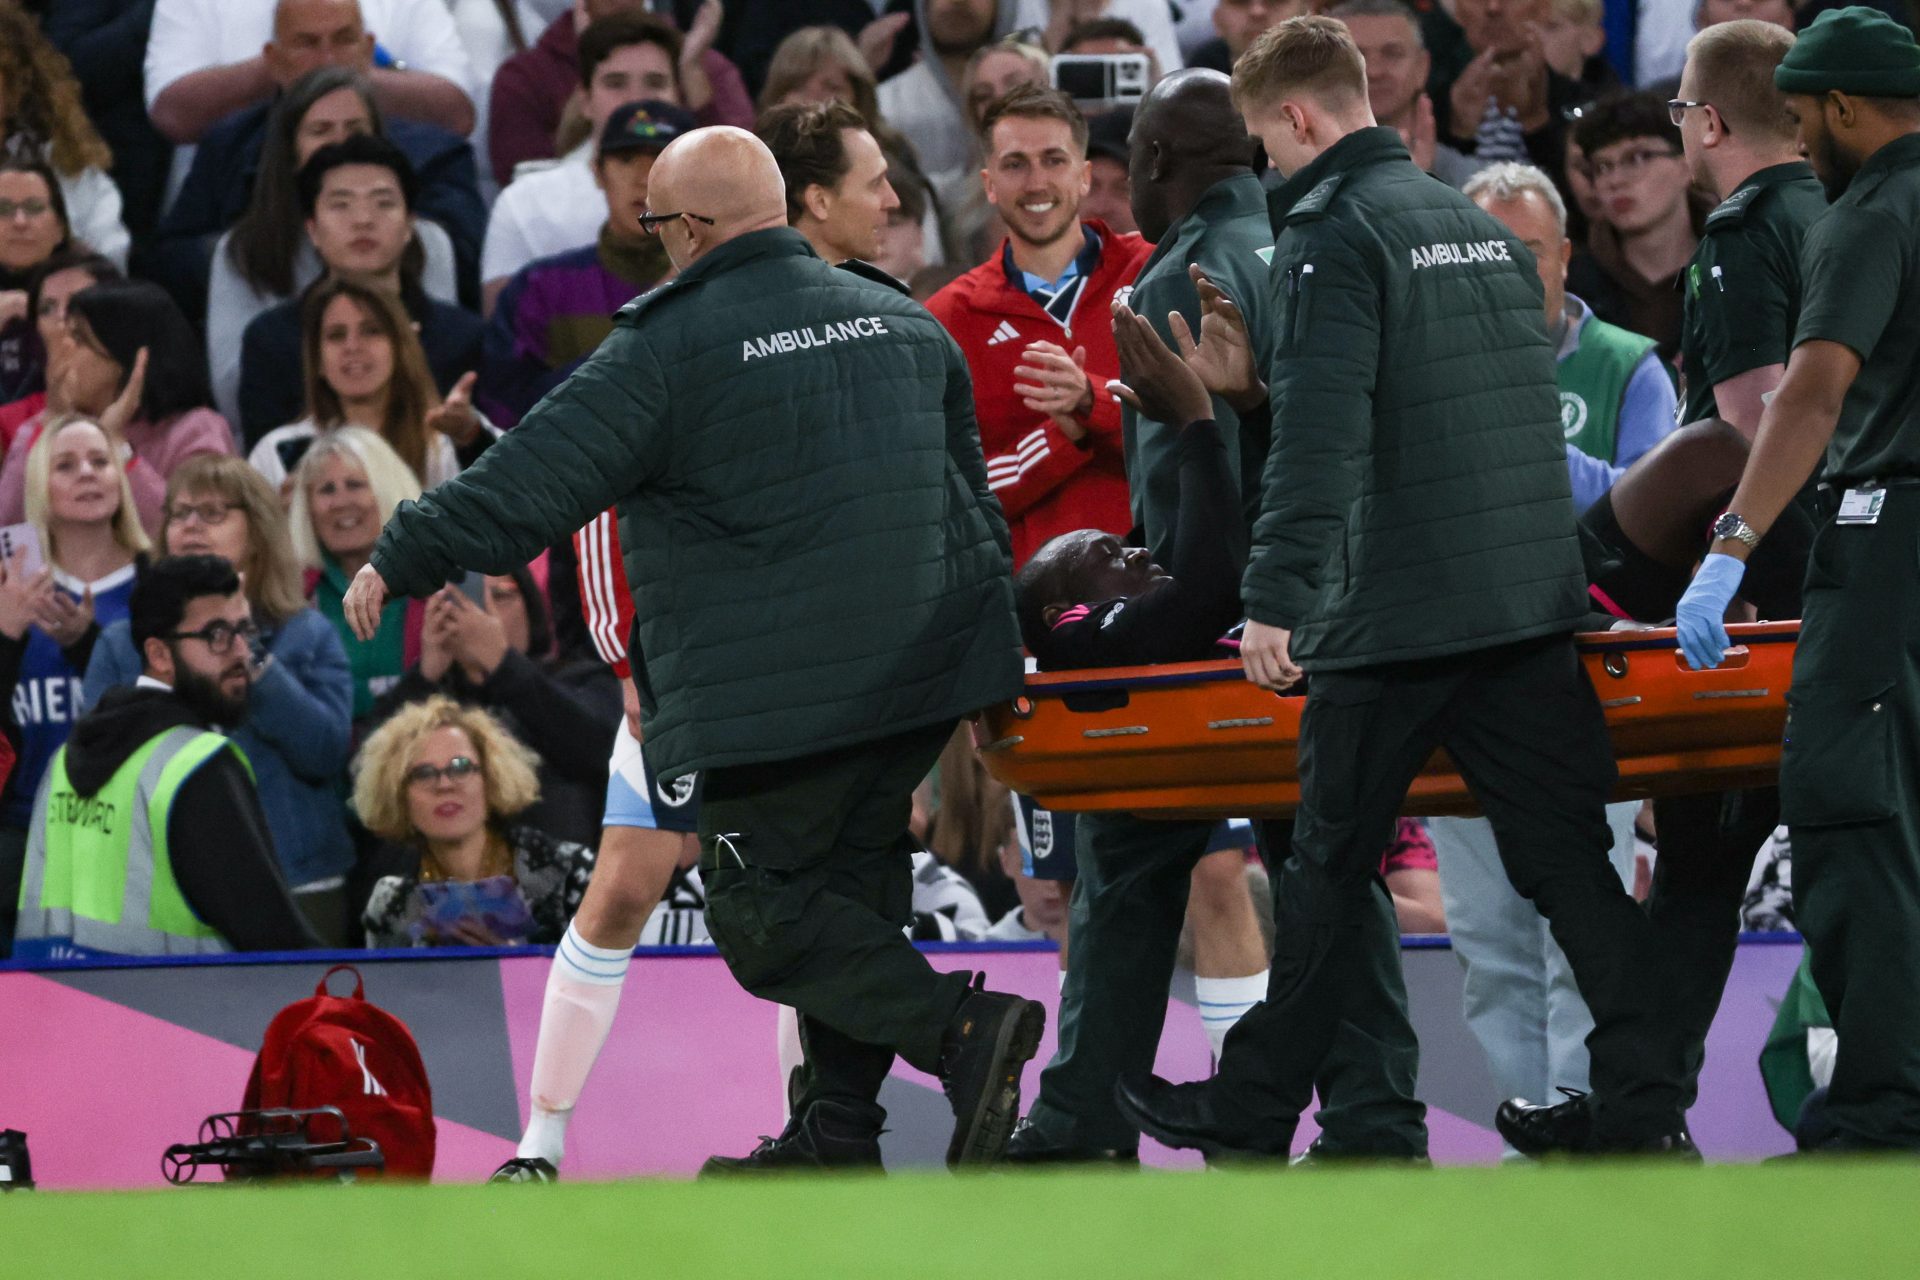 Usain Bolt leaves Soccer Aid on stretcher after suffering serious injury